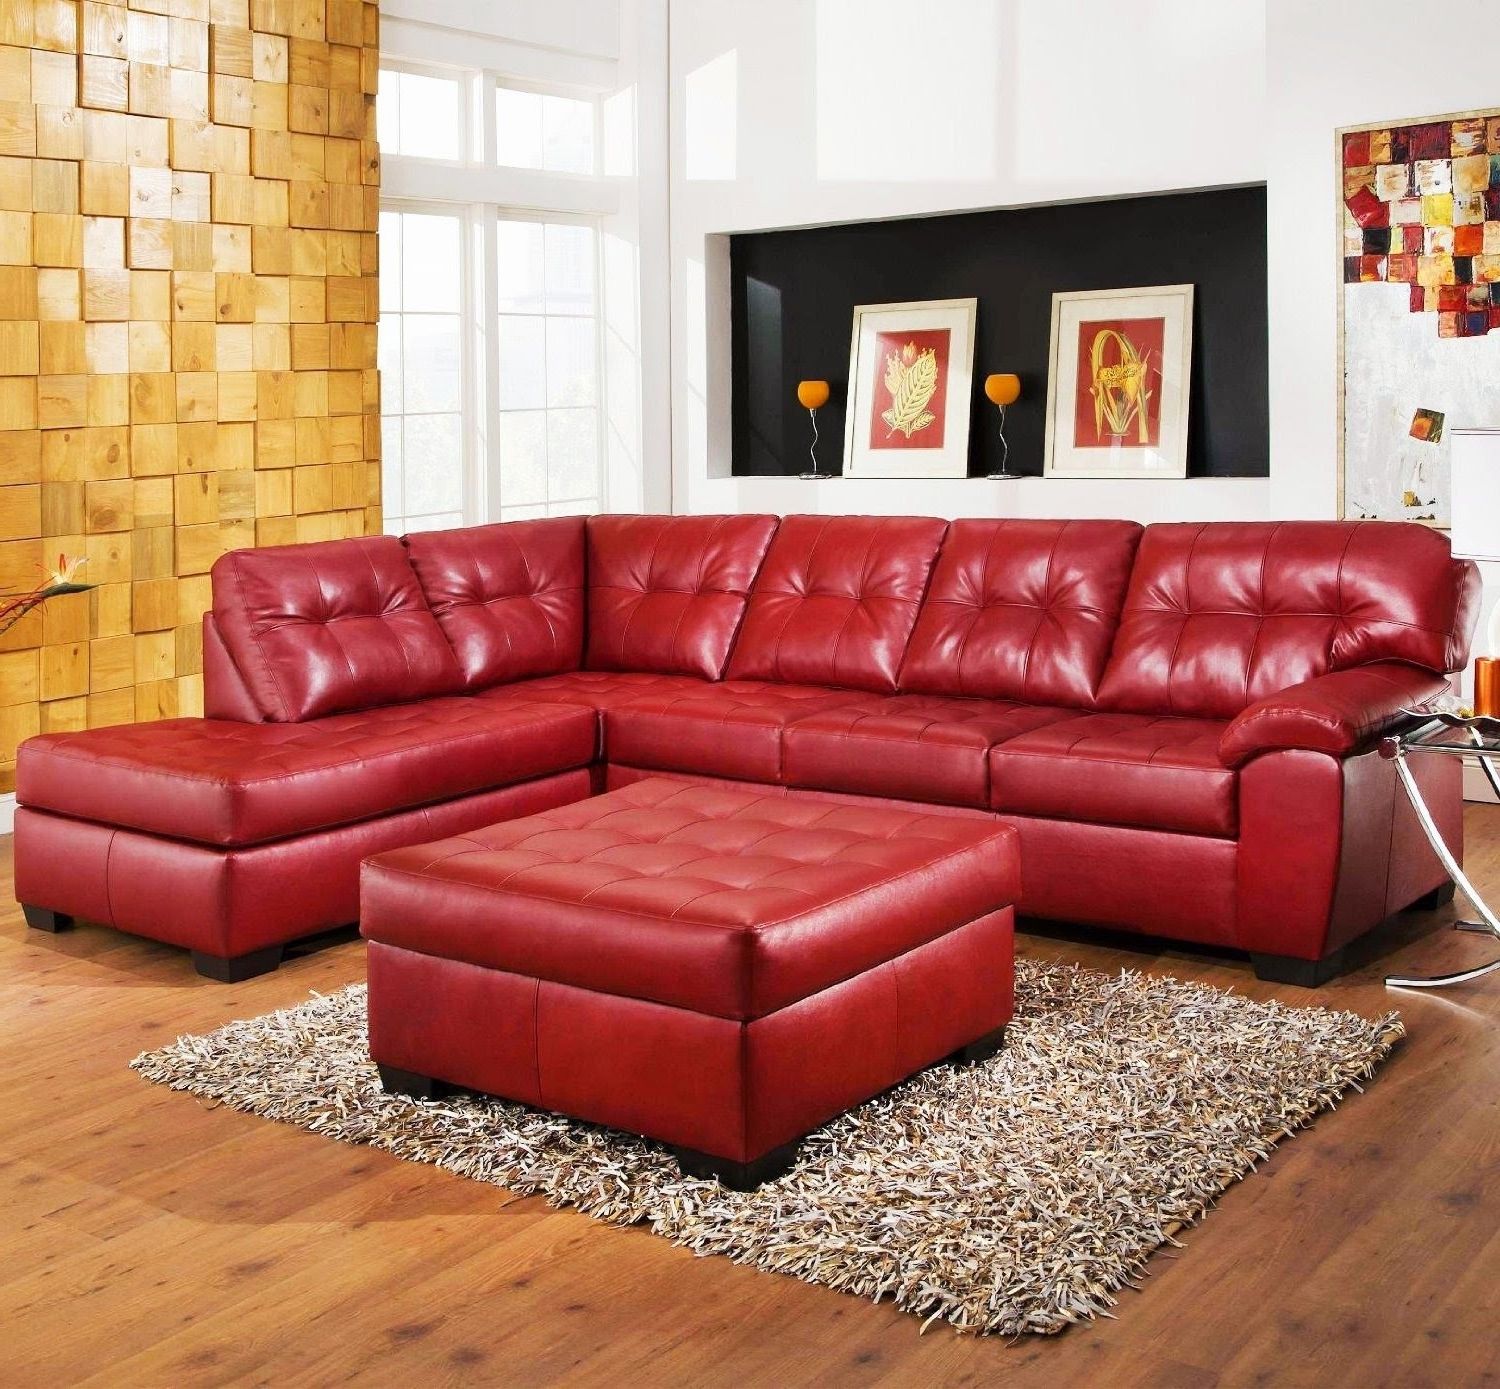 Sofa : Red Leather Sectional Sofa Clearance Sofa Style Dog Bed Regarding Most Popular Red Leather Sectionals With Chaise (View 1 of 15)